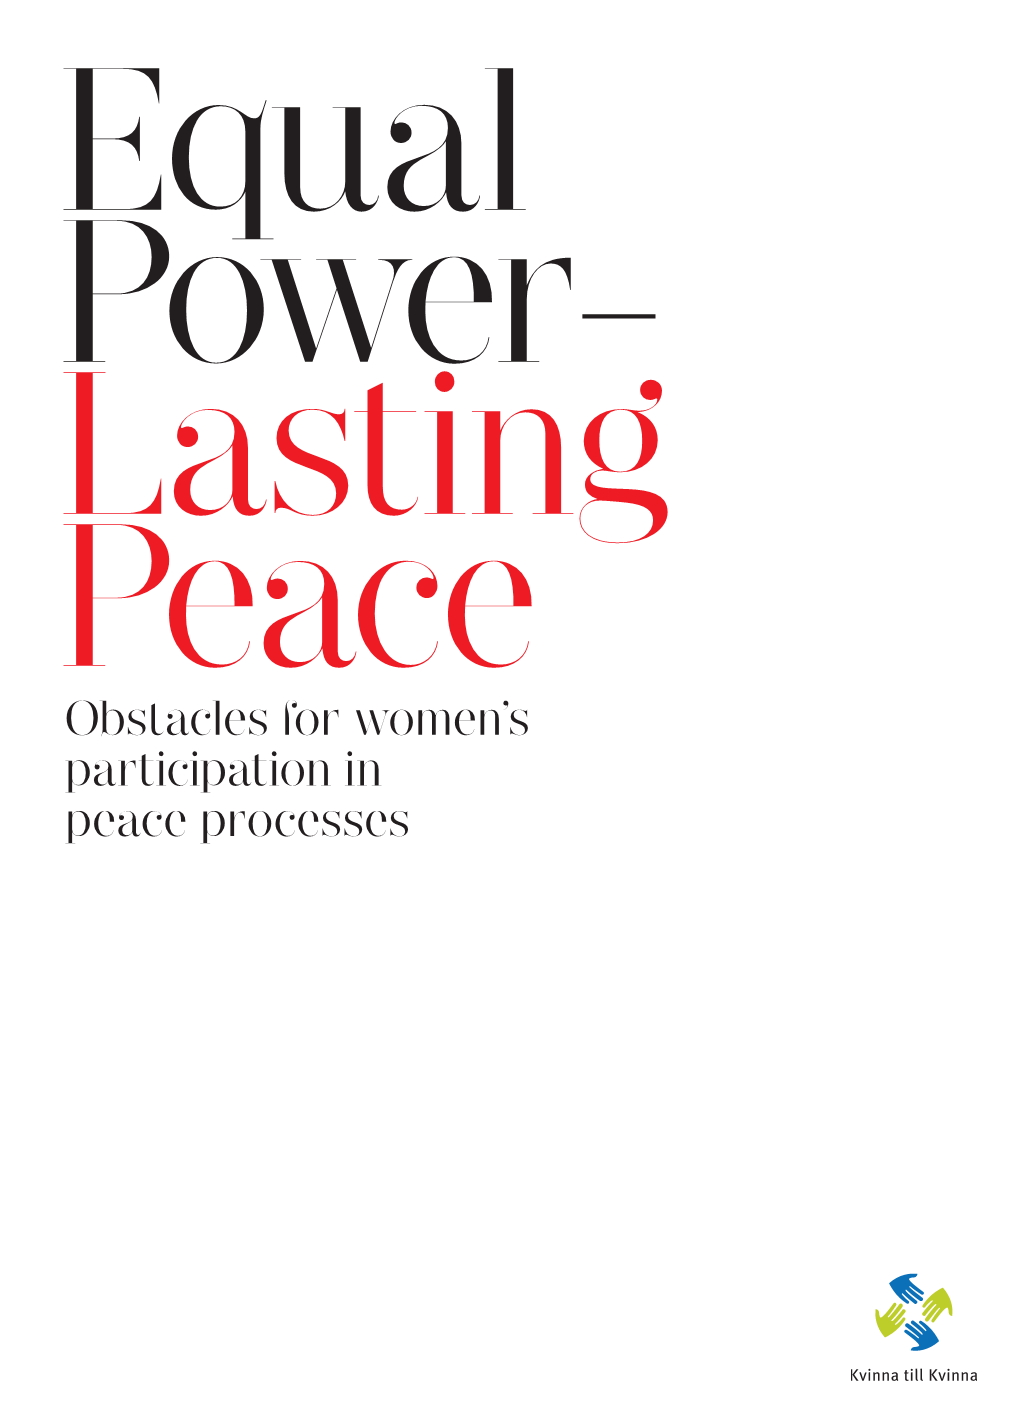 Obstacles for Women's Participation in Peace Processes